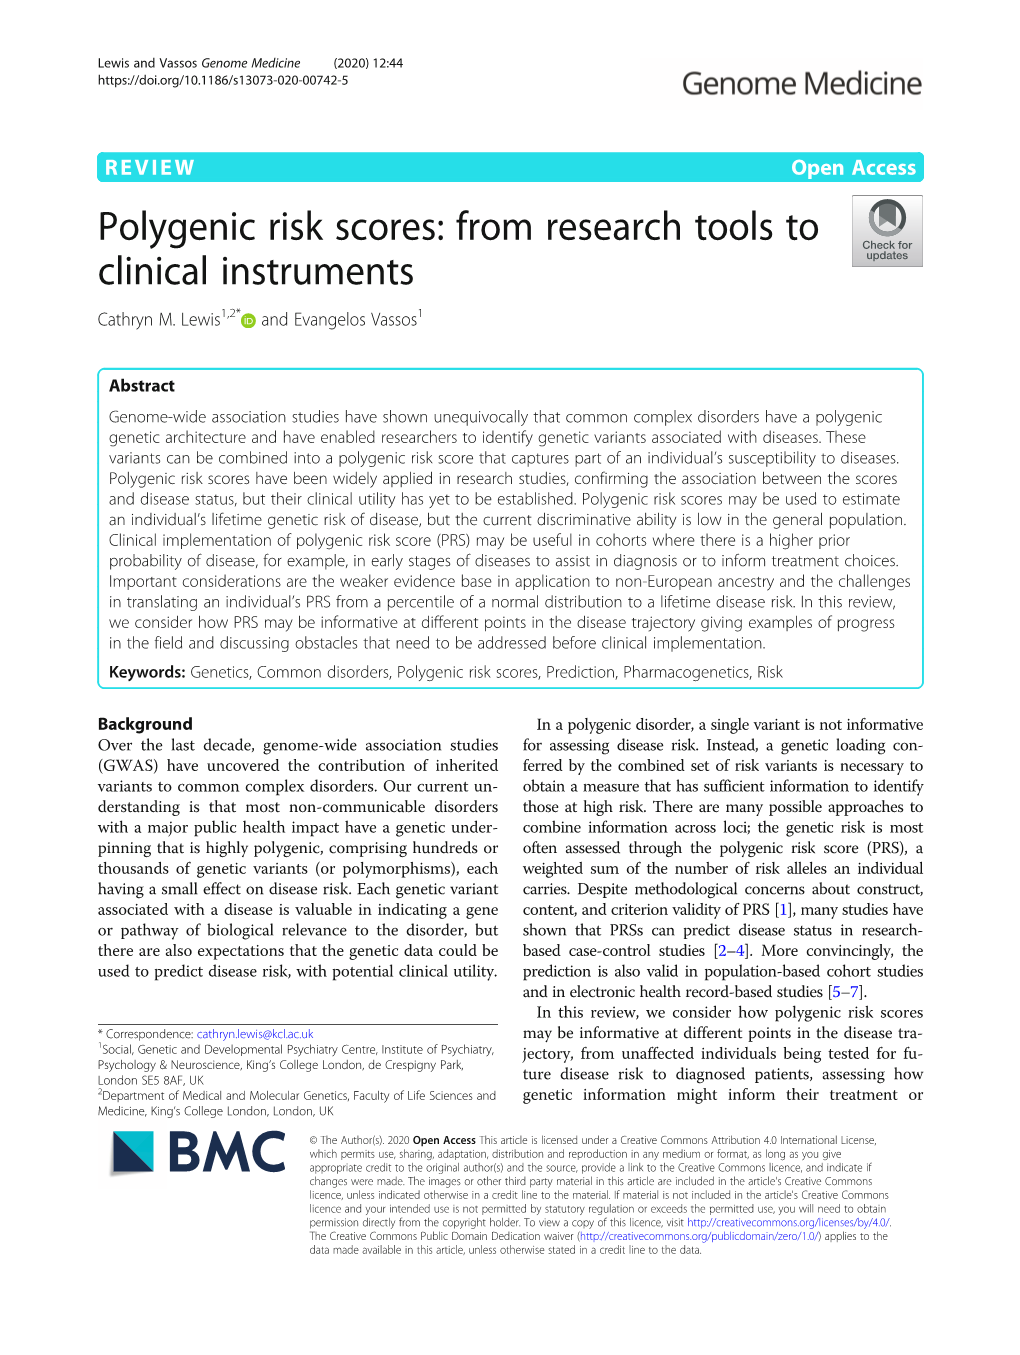 Polygenic Risk Scores: from Research Tools to Clinical Instruments Cathryn M